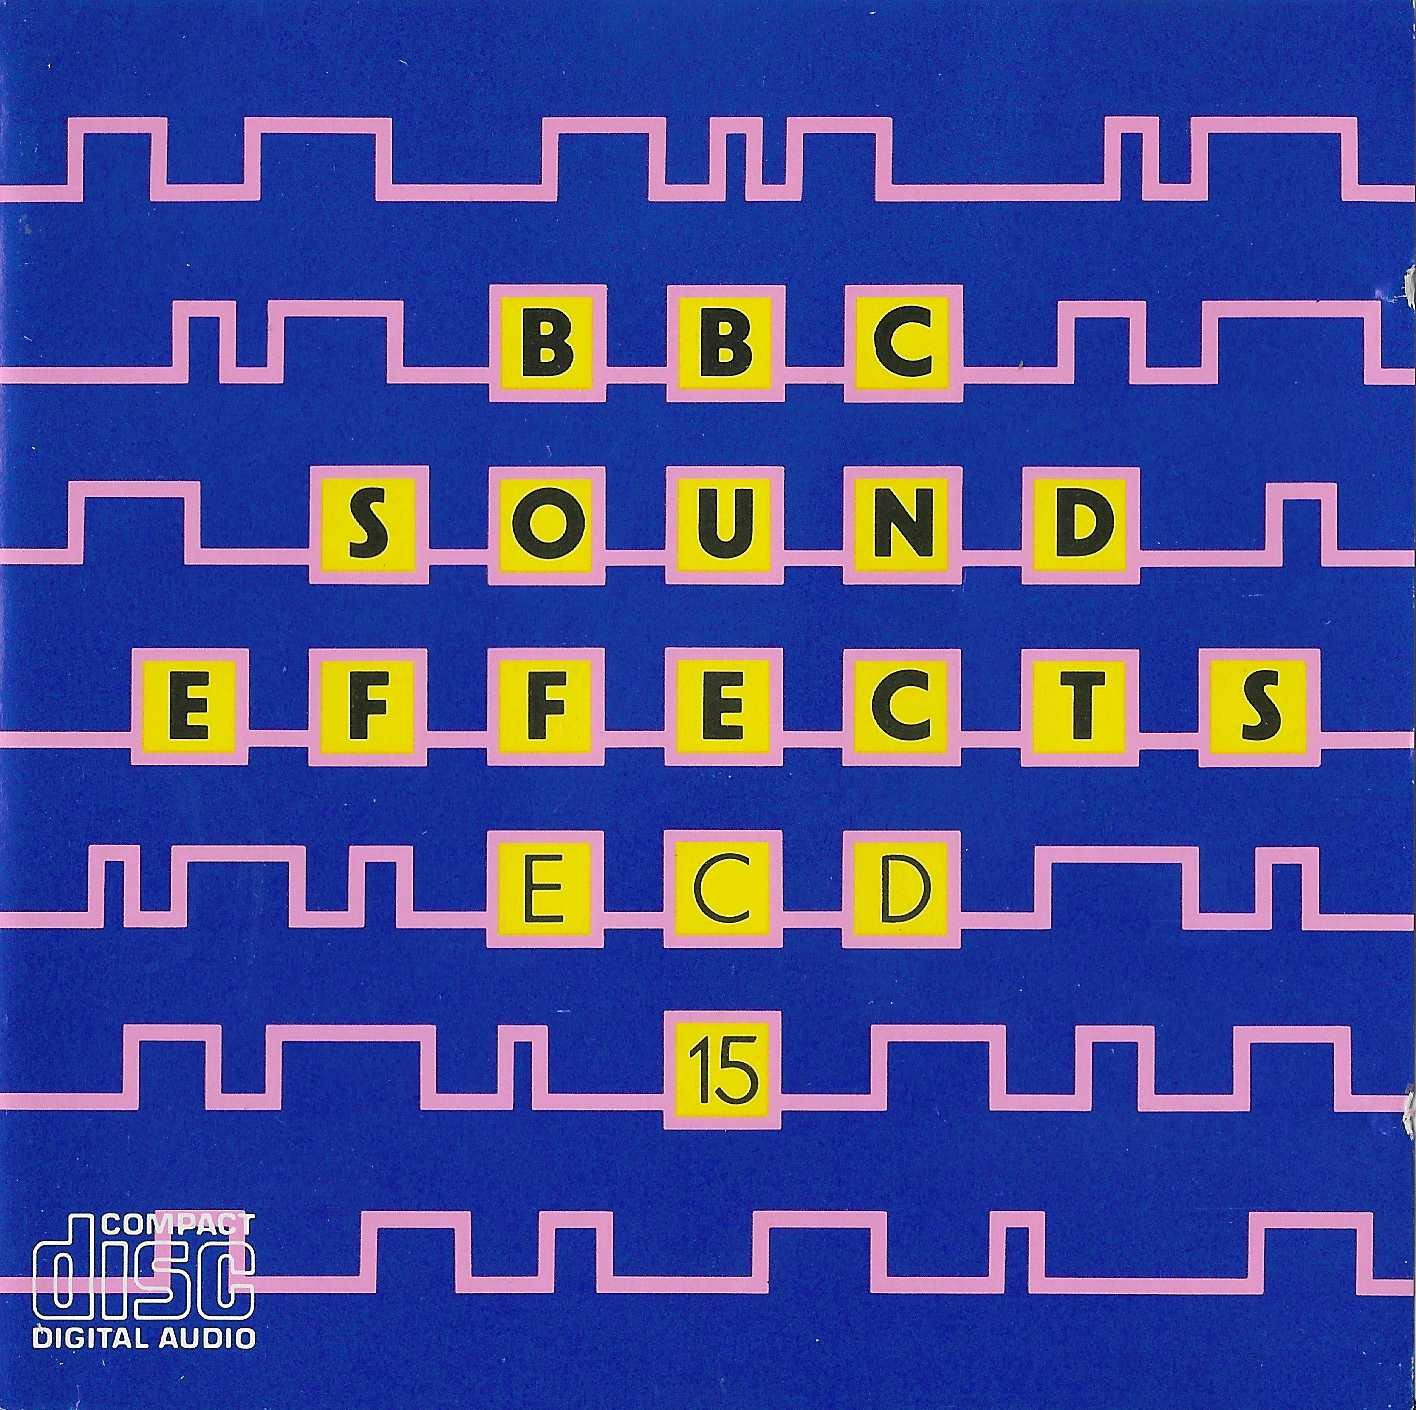 Front cover of BBCCD SFX015